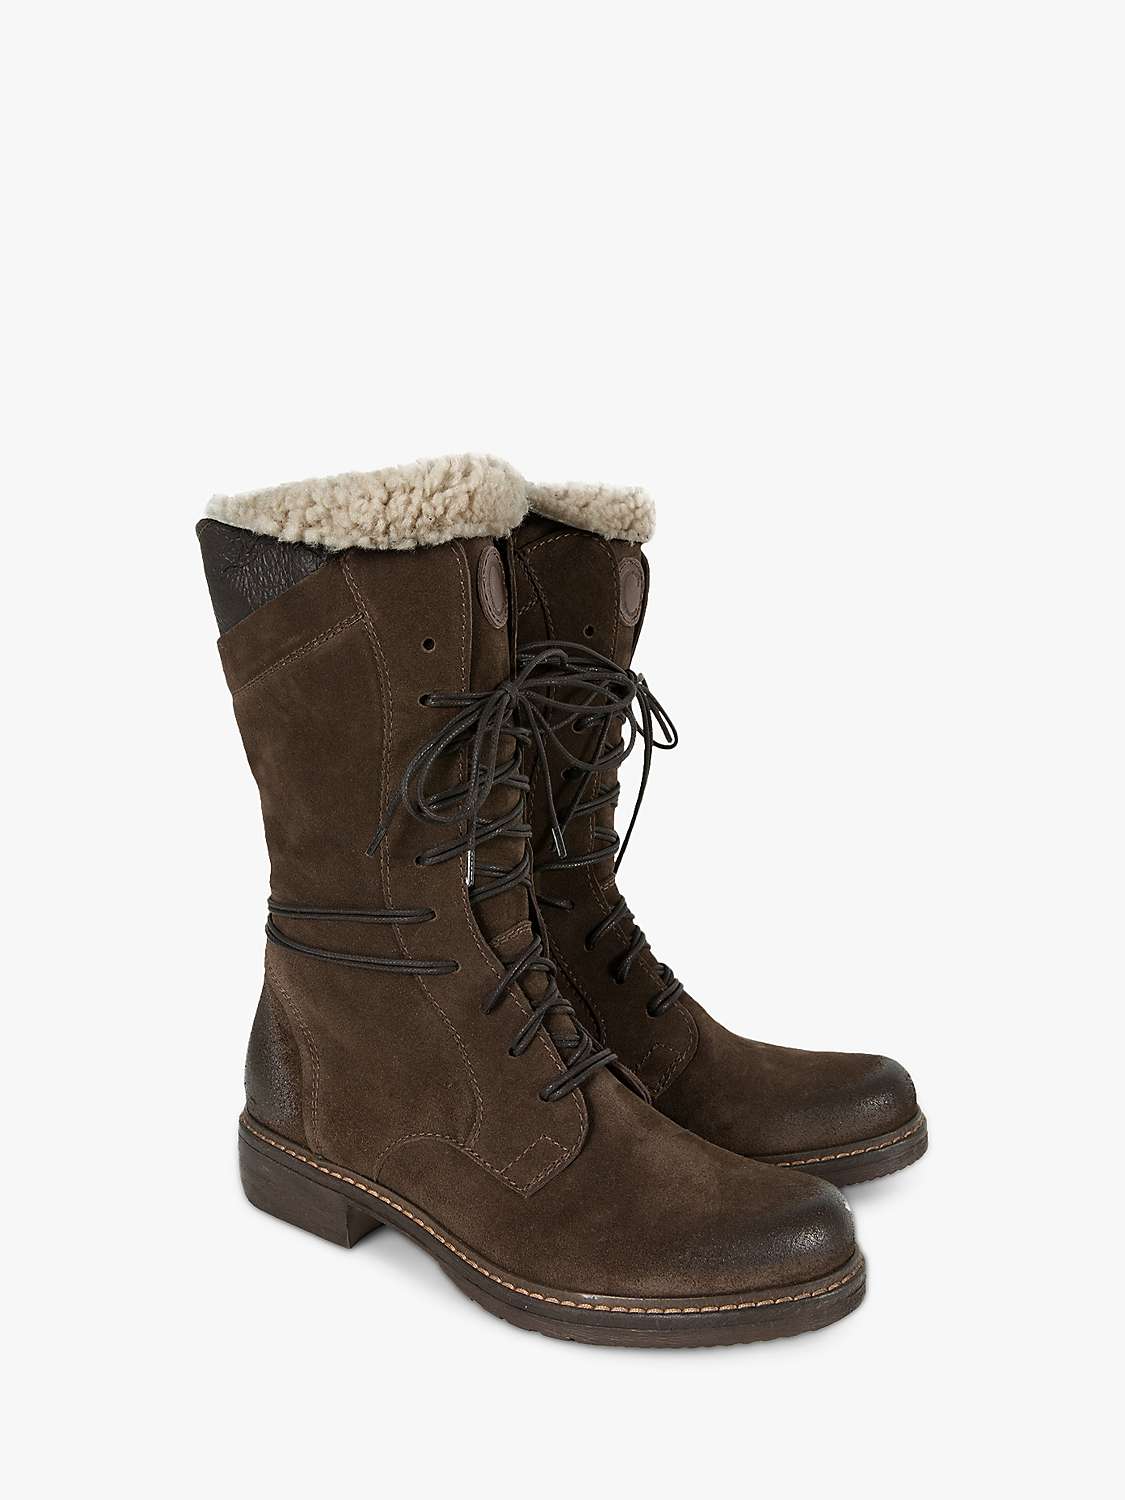 Buy Celtic & Co. Woodsman Suede and Sheepskin Boots, Brown Online at johnlewis.com